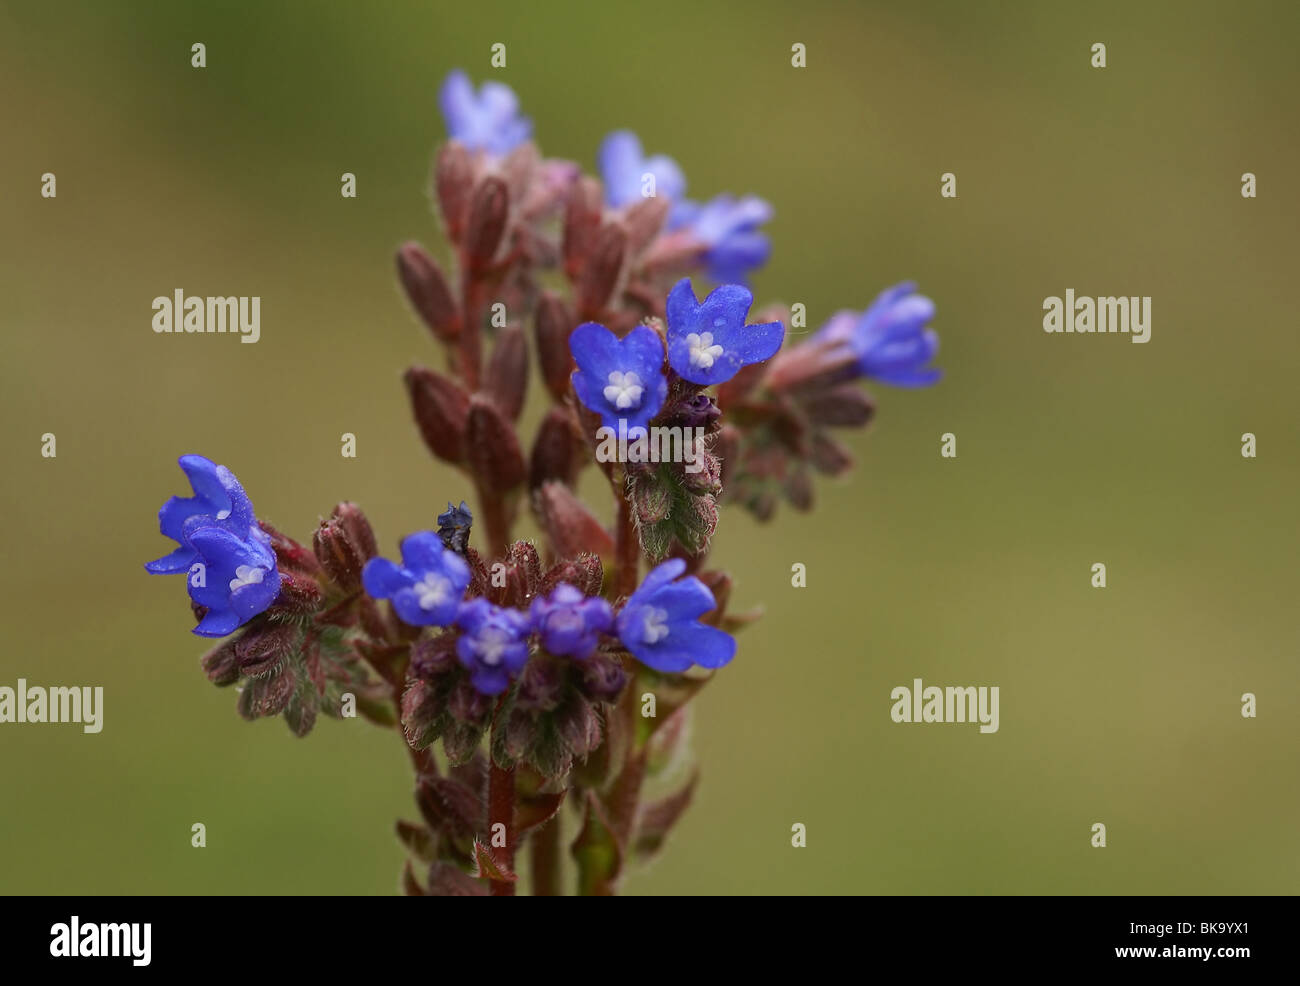 Macro image of the blue flowers of the Alkanet Stock Photo